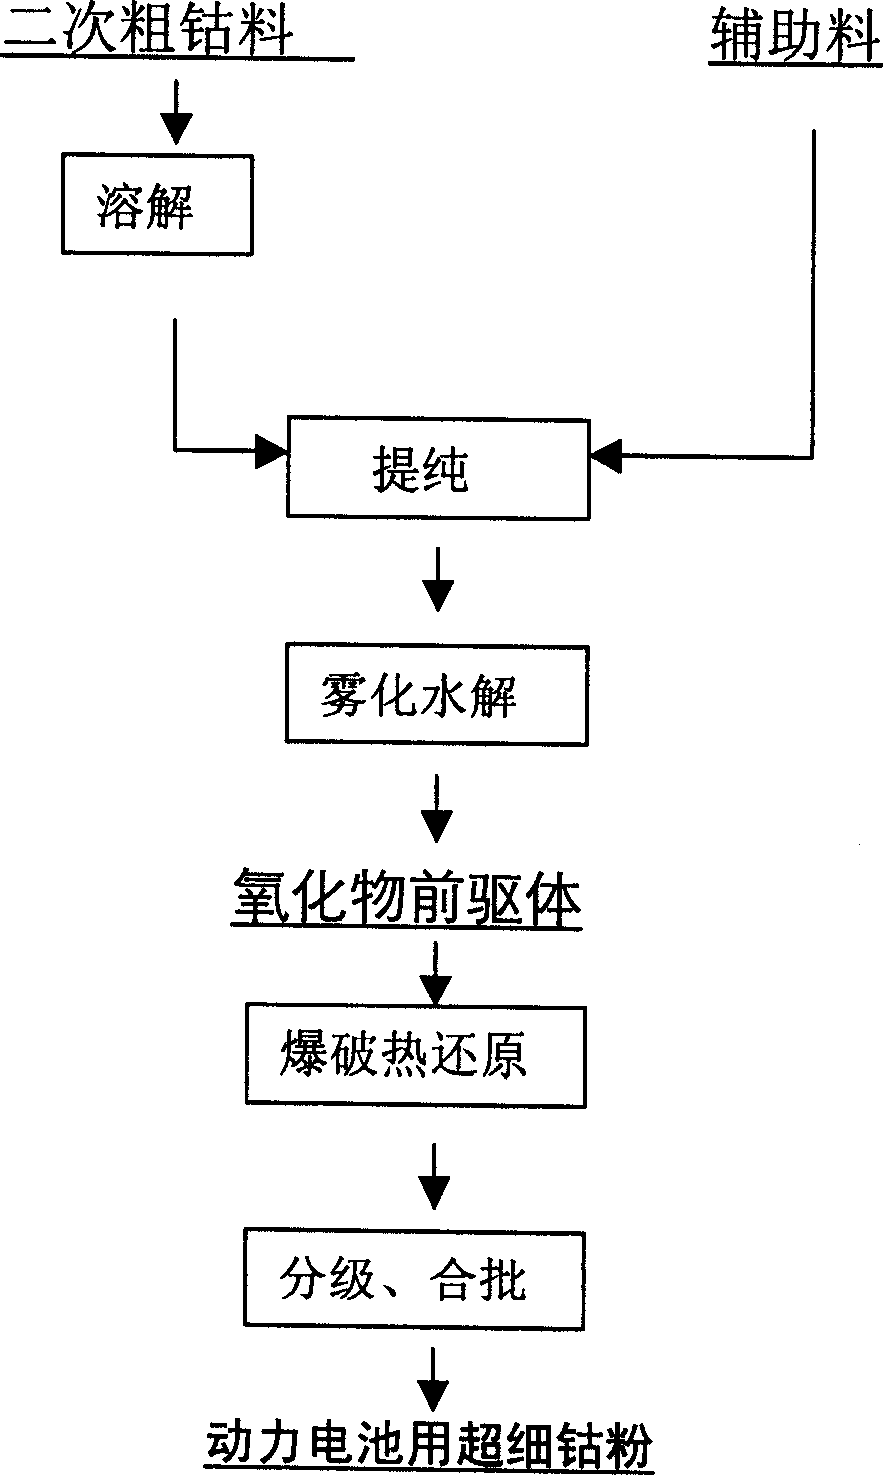 Production and producing apparatus for super fine cobalt powder by circulating technology